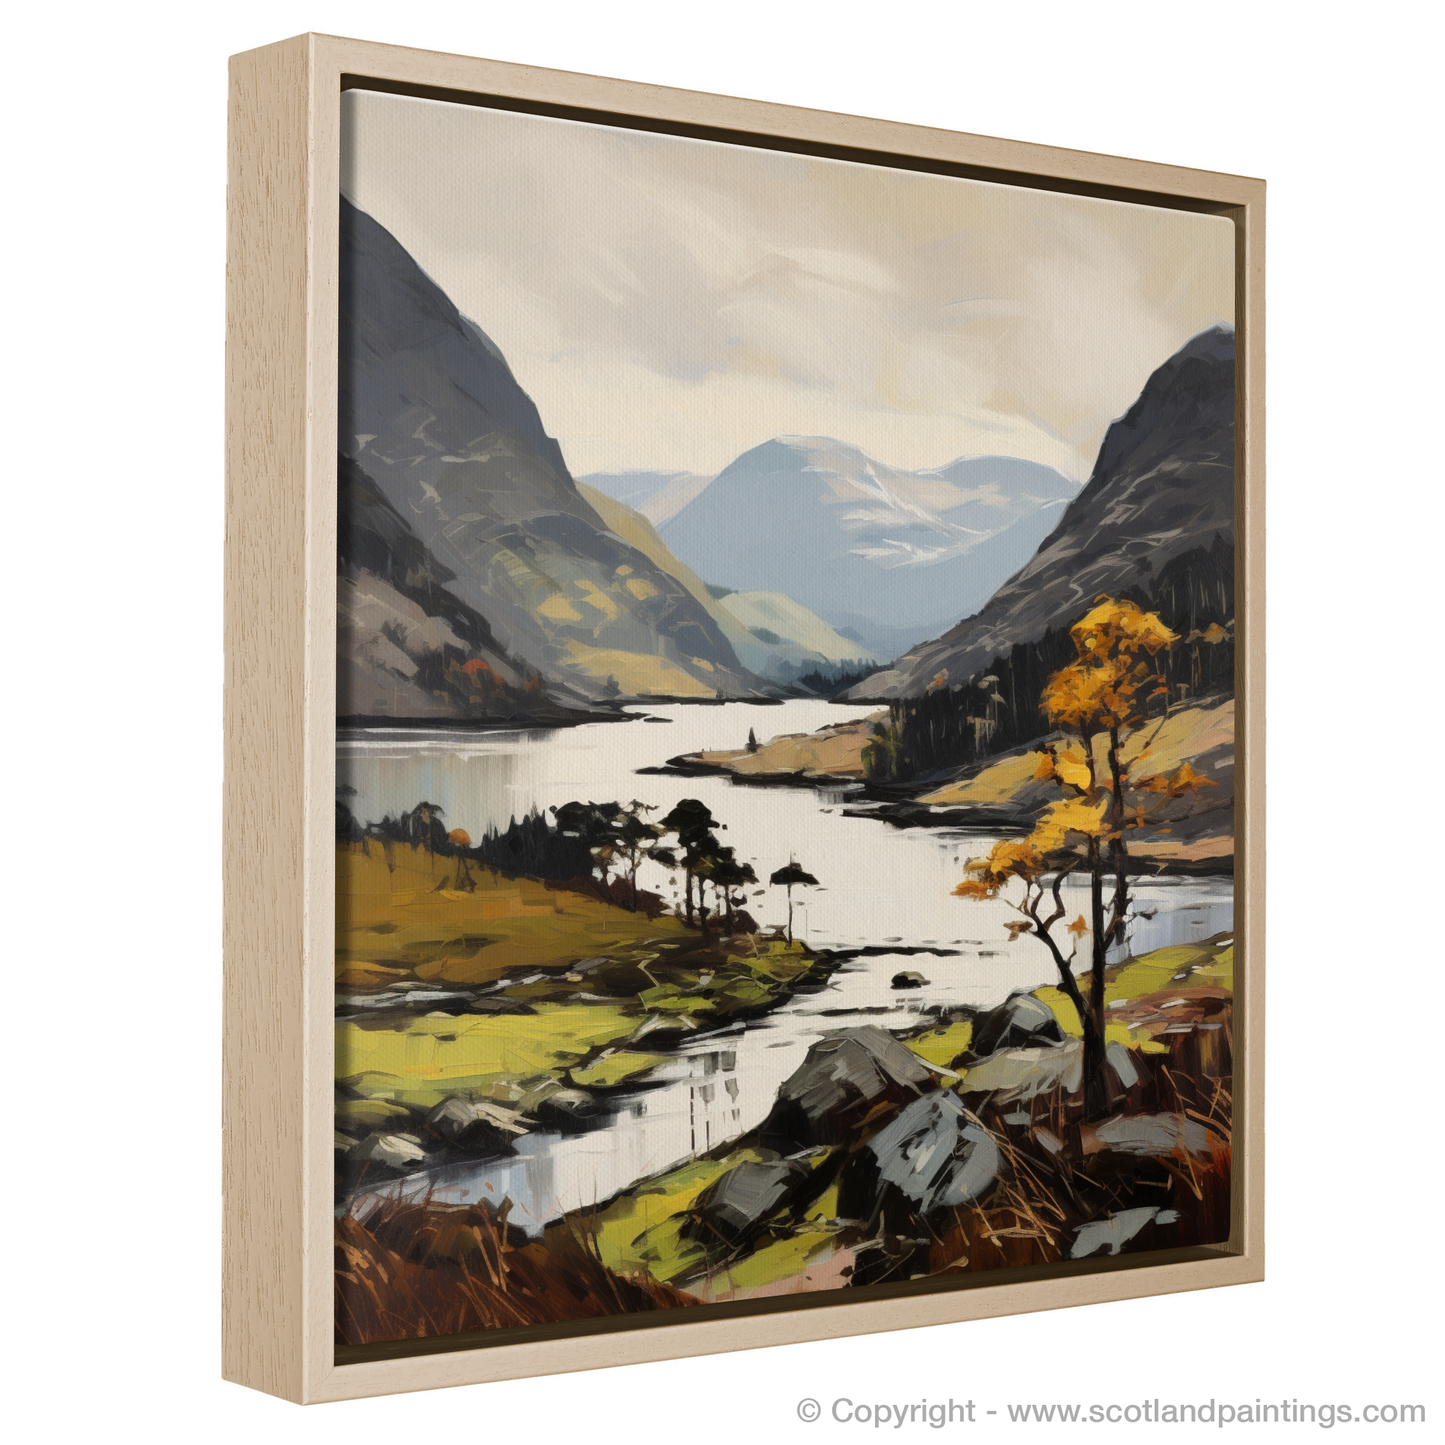 Painting and Art Print of Glenfinnan, Highlands entitled "Highland Embrace: An Expressionist Ode to Glenfinnan".